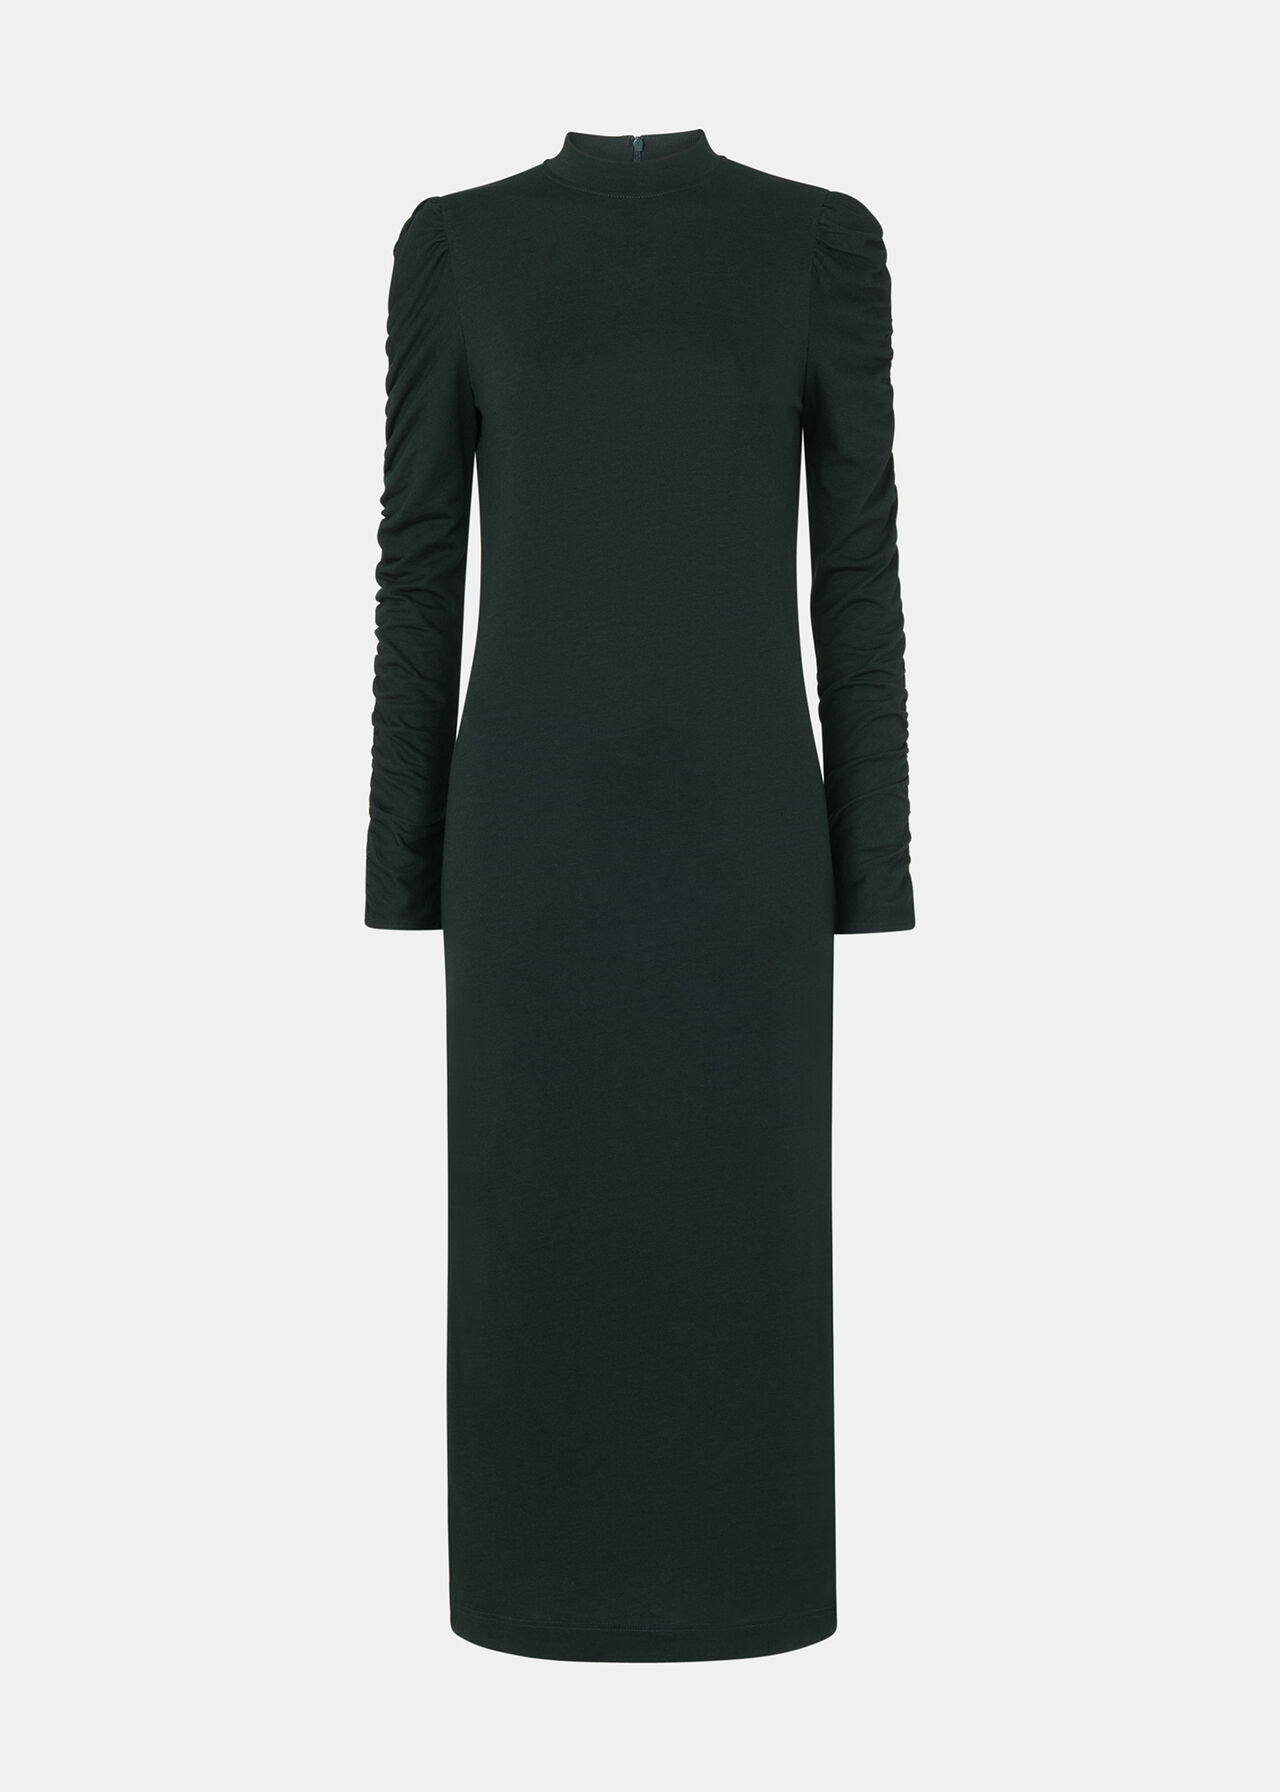 Dark Green Ruched Sleeve Jersey Dress | WHISTLES